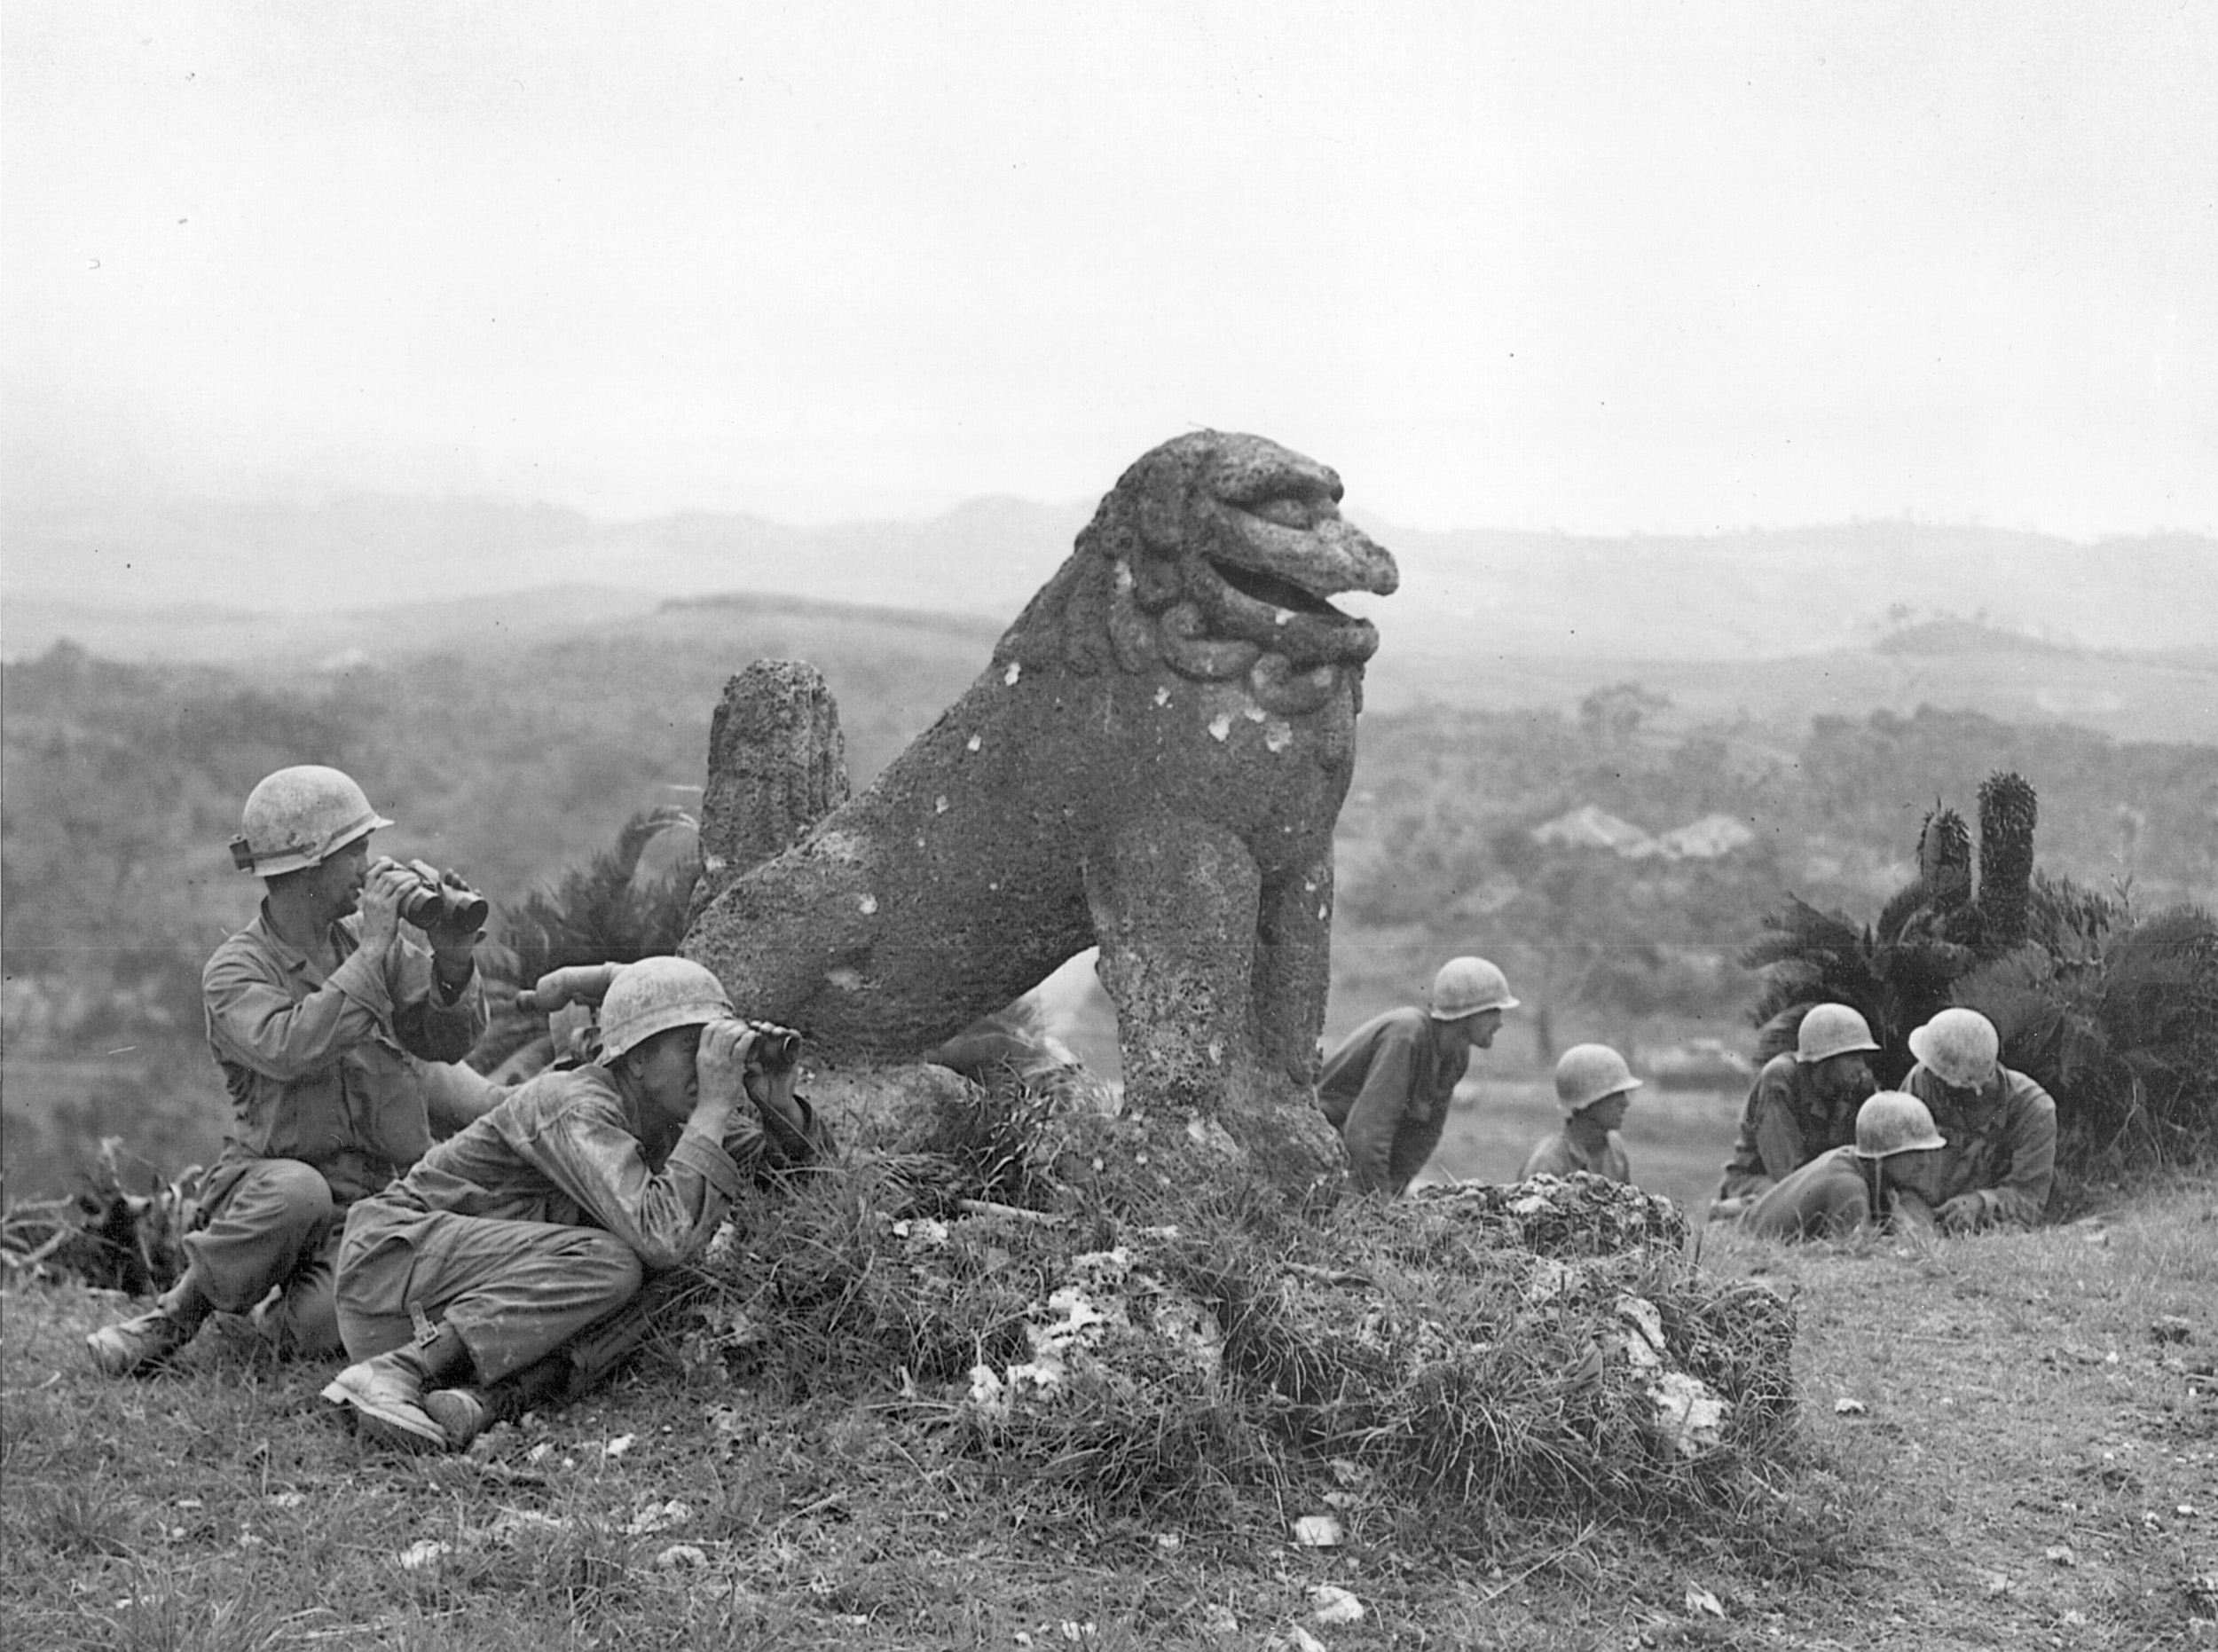 A battered Okinawan statue shows the effects of recent shellfire while observers of the U.S. 7th Infantry Division use it as partial cover. Japanese mortar and artillery fire were often zeroed in on approaches to strongpoints. As a result, costly and time-consuming assaults were required to complete the capture of the island.